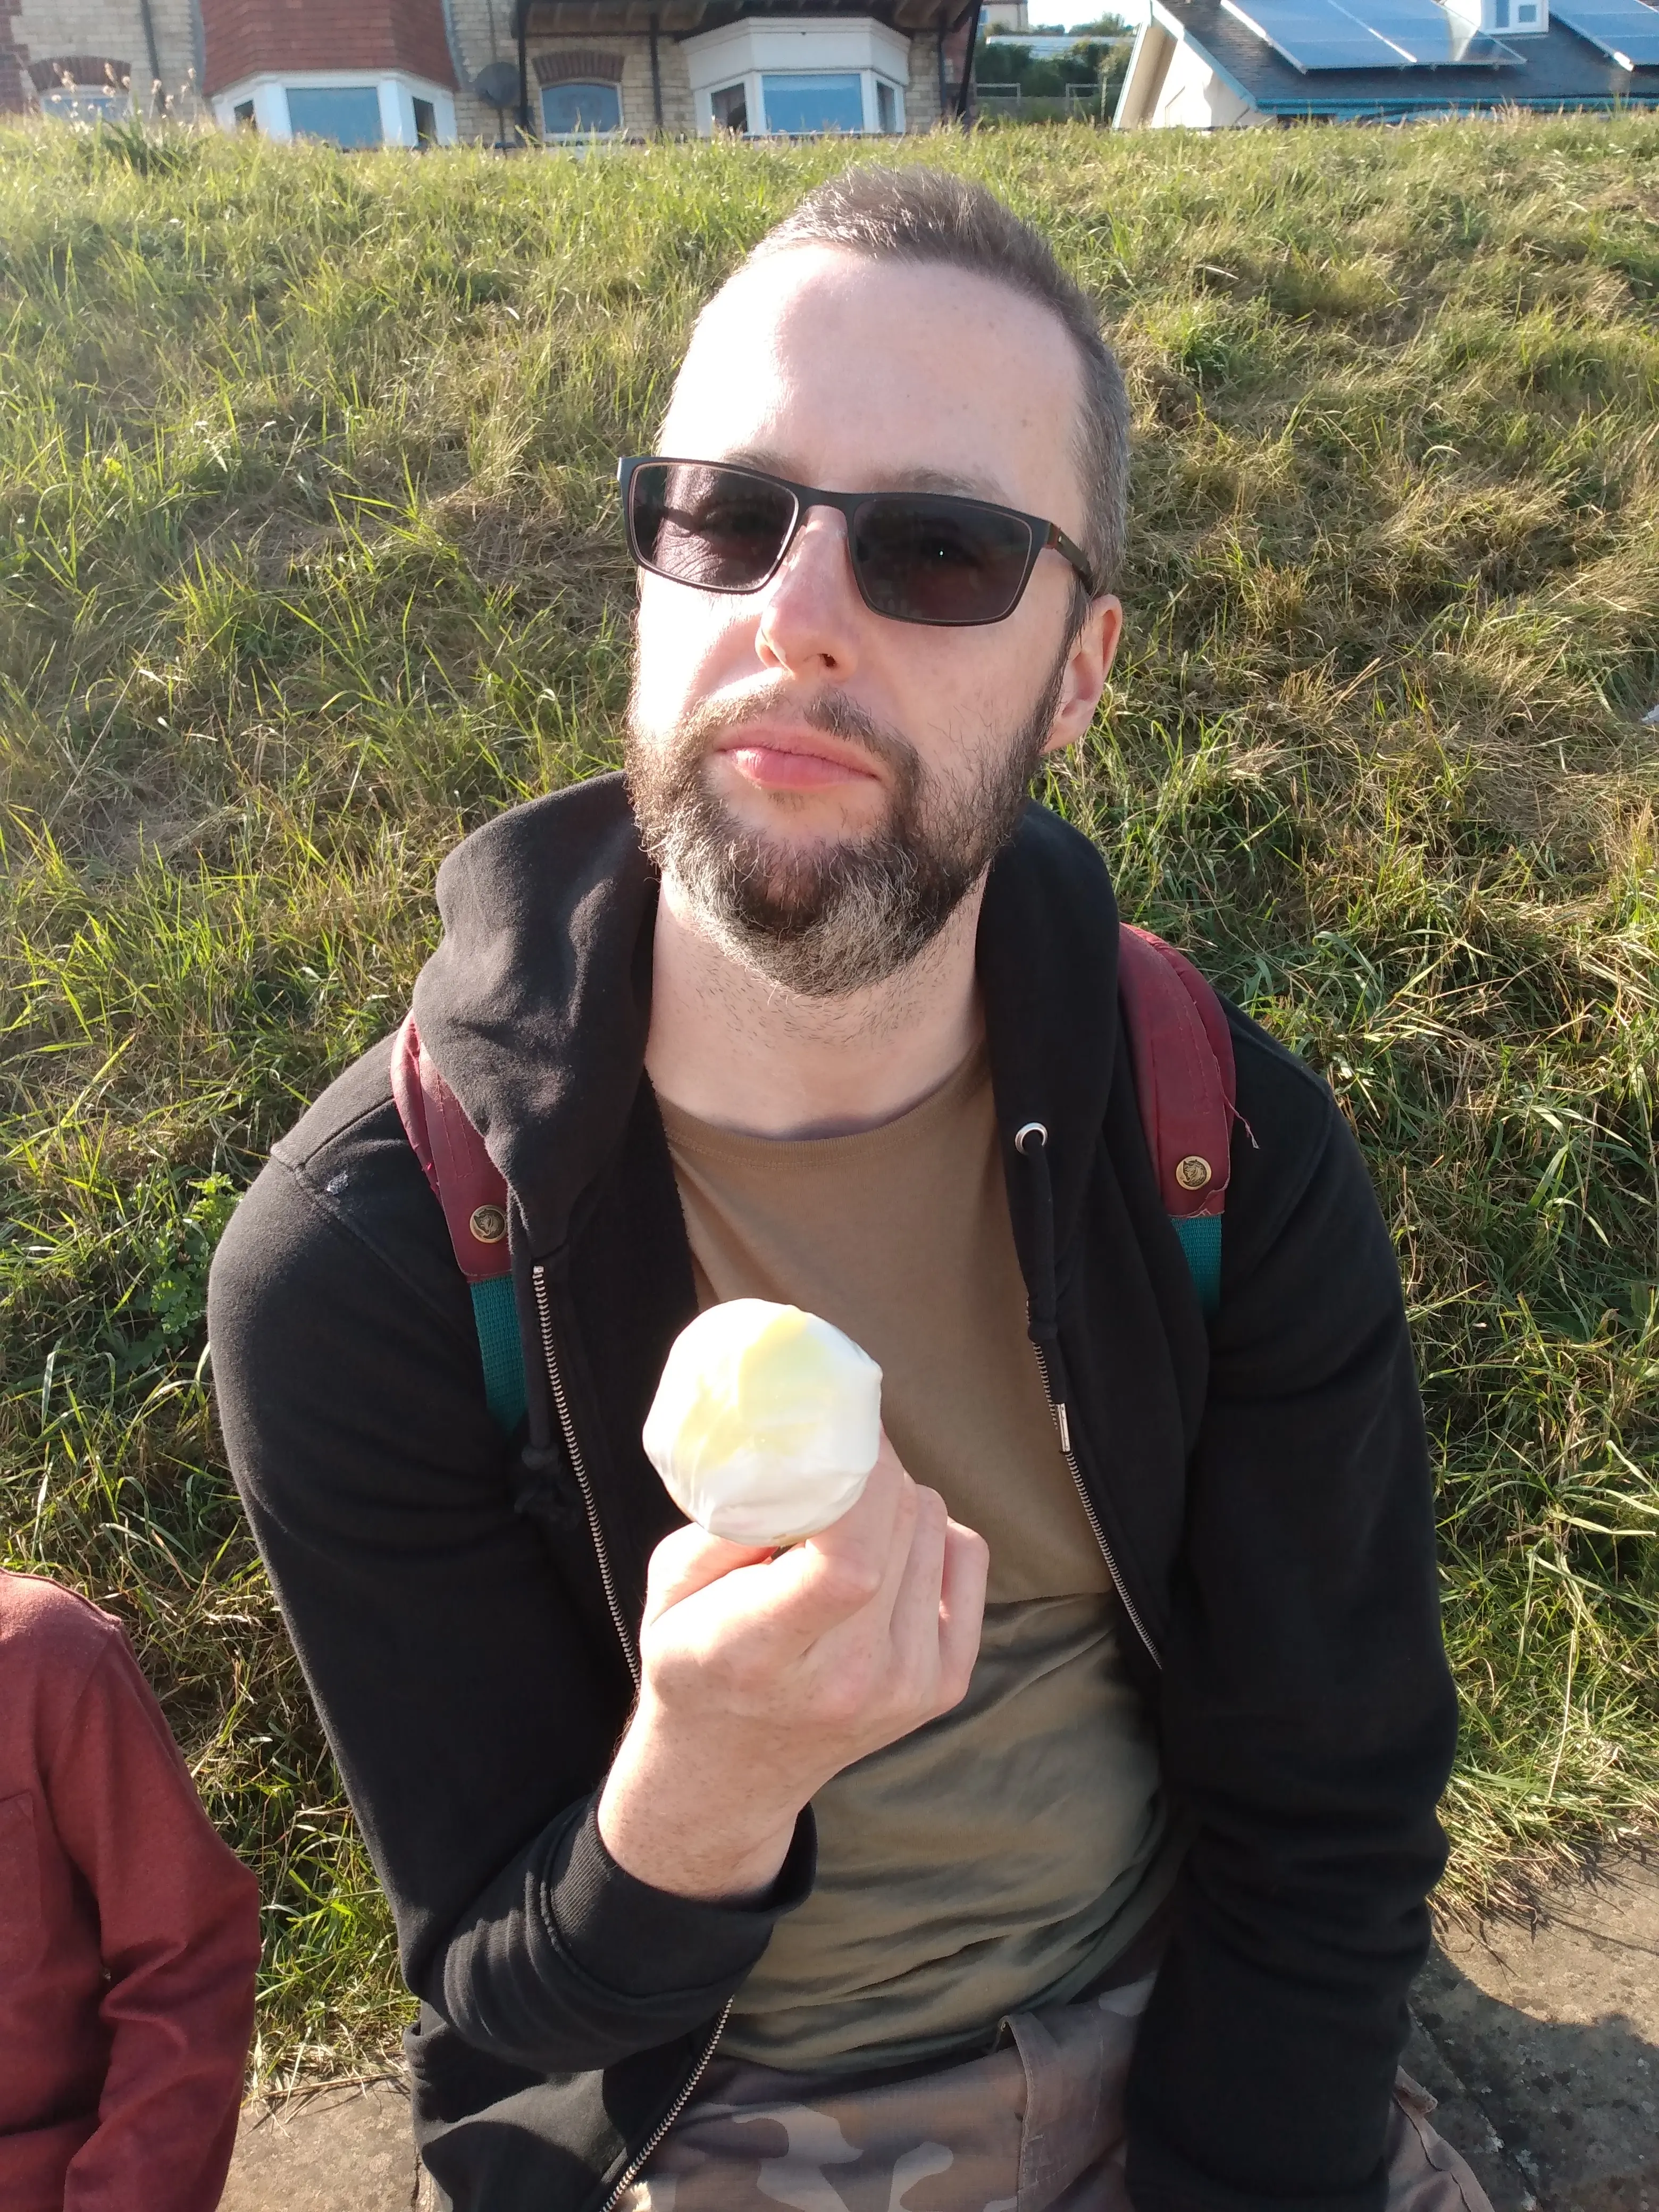 James eating an Ice Cream at the seaside.